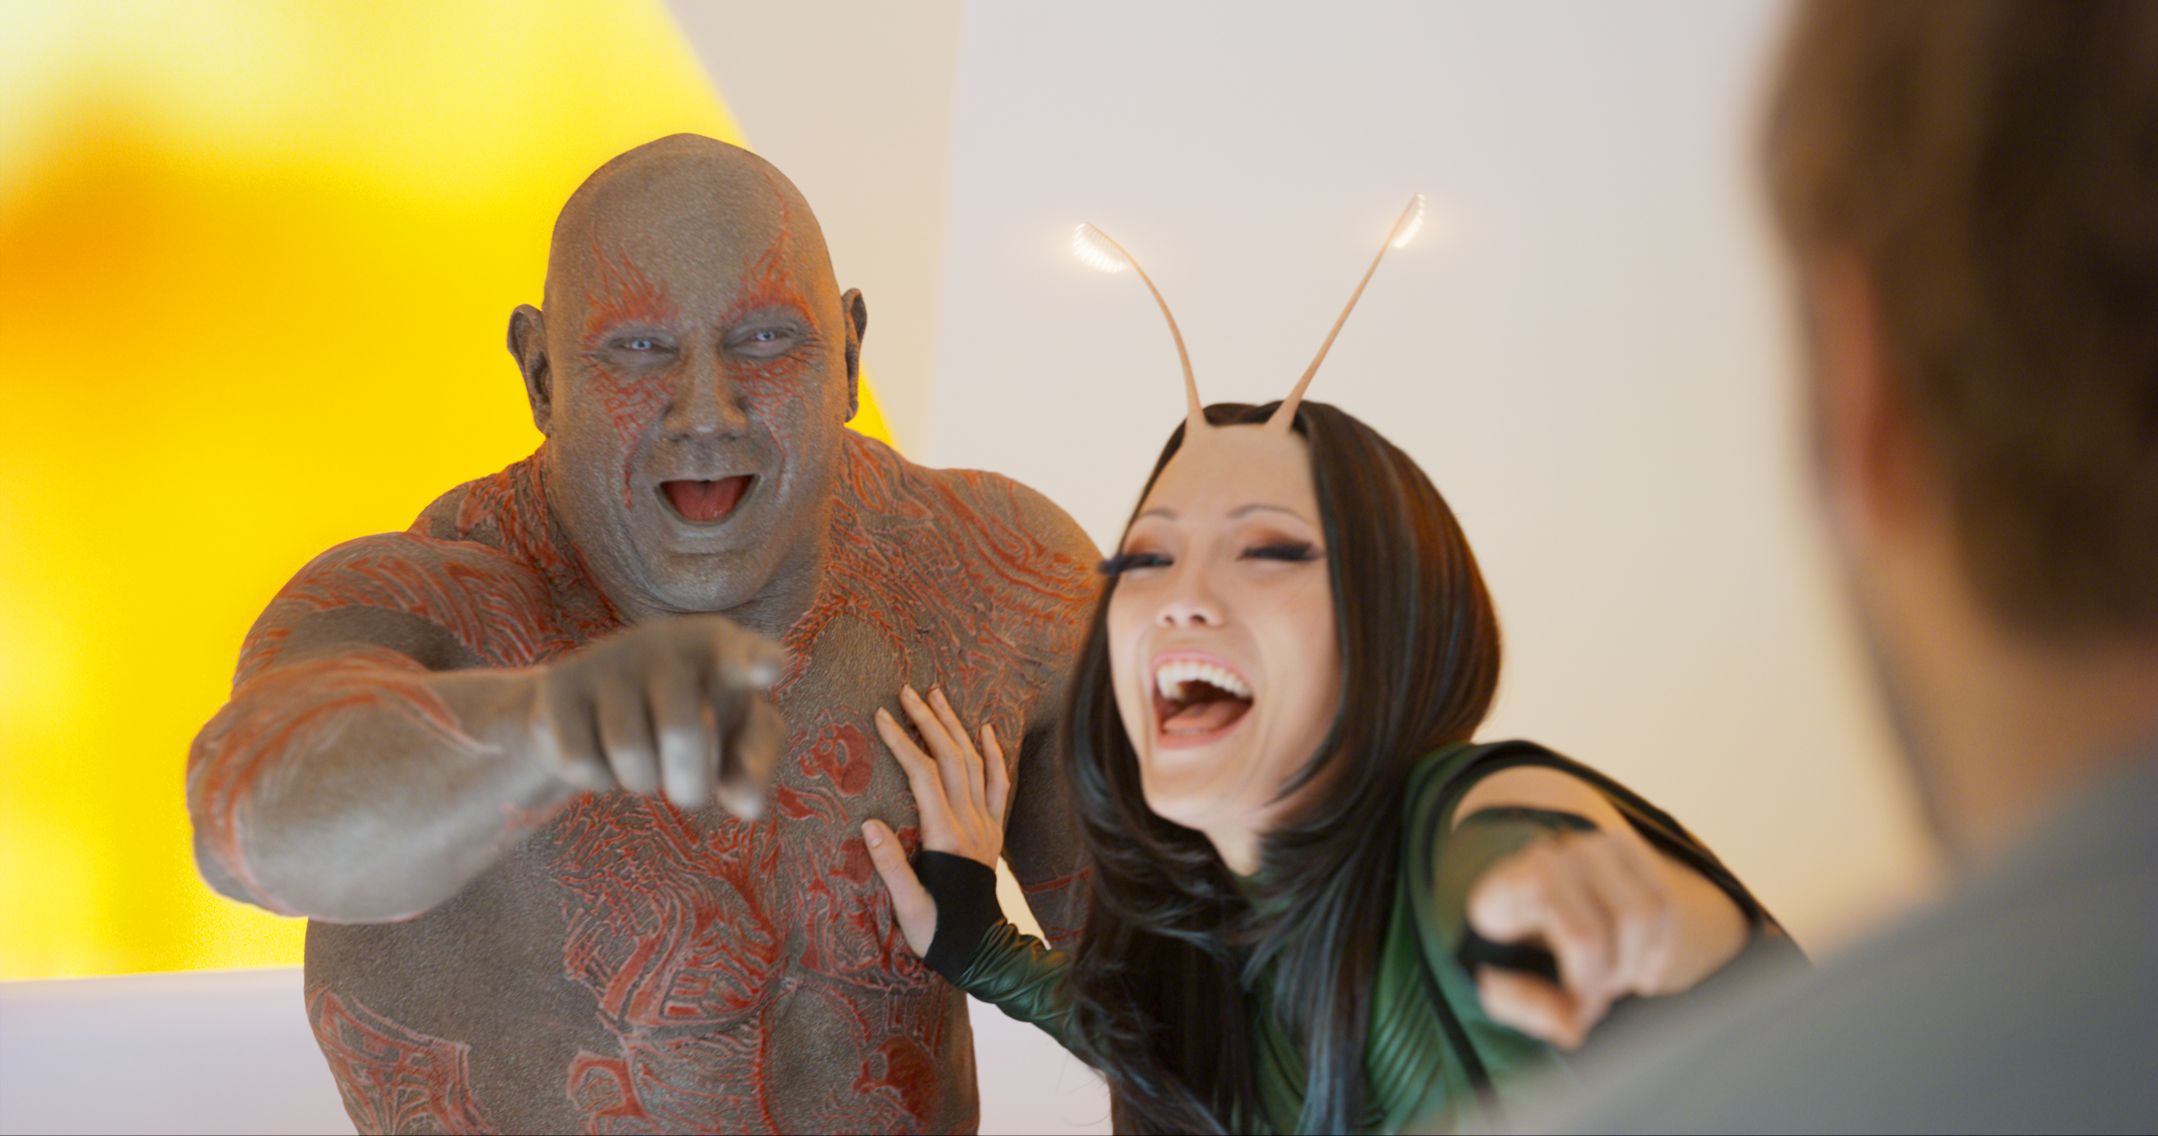 Guardians Of The Galaxy 4 Changes To Drax Made For The Better (& 4 That Were Worse)